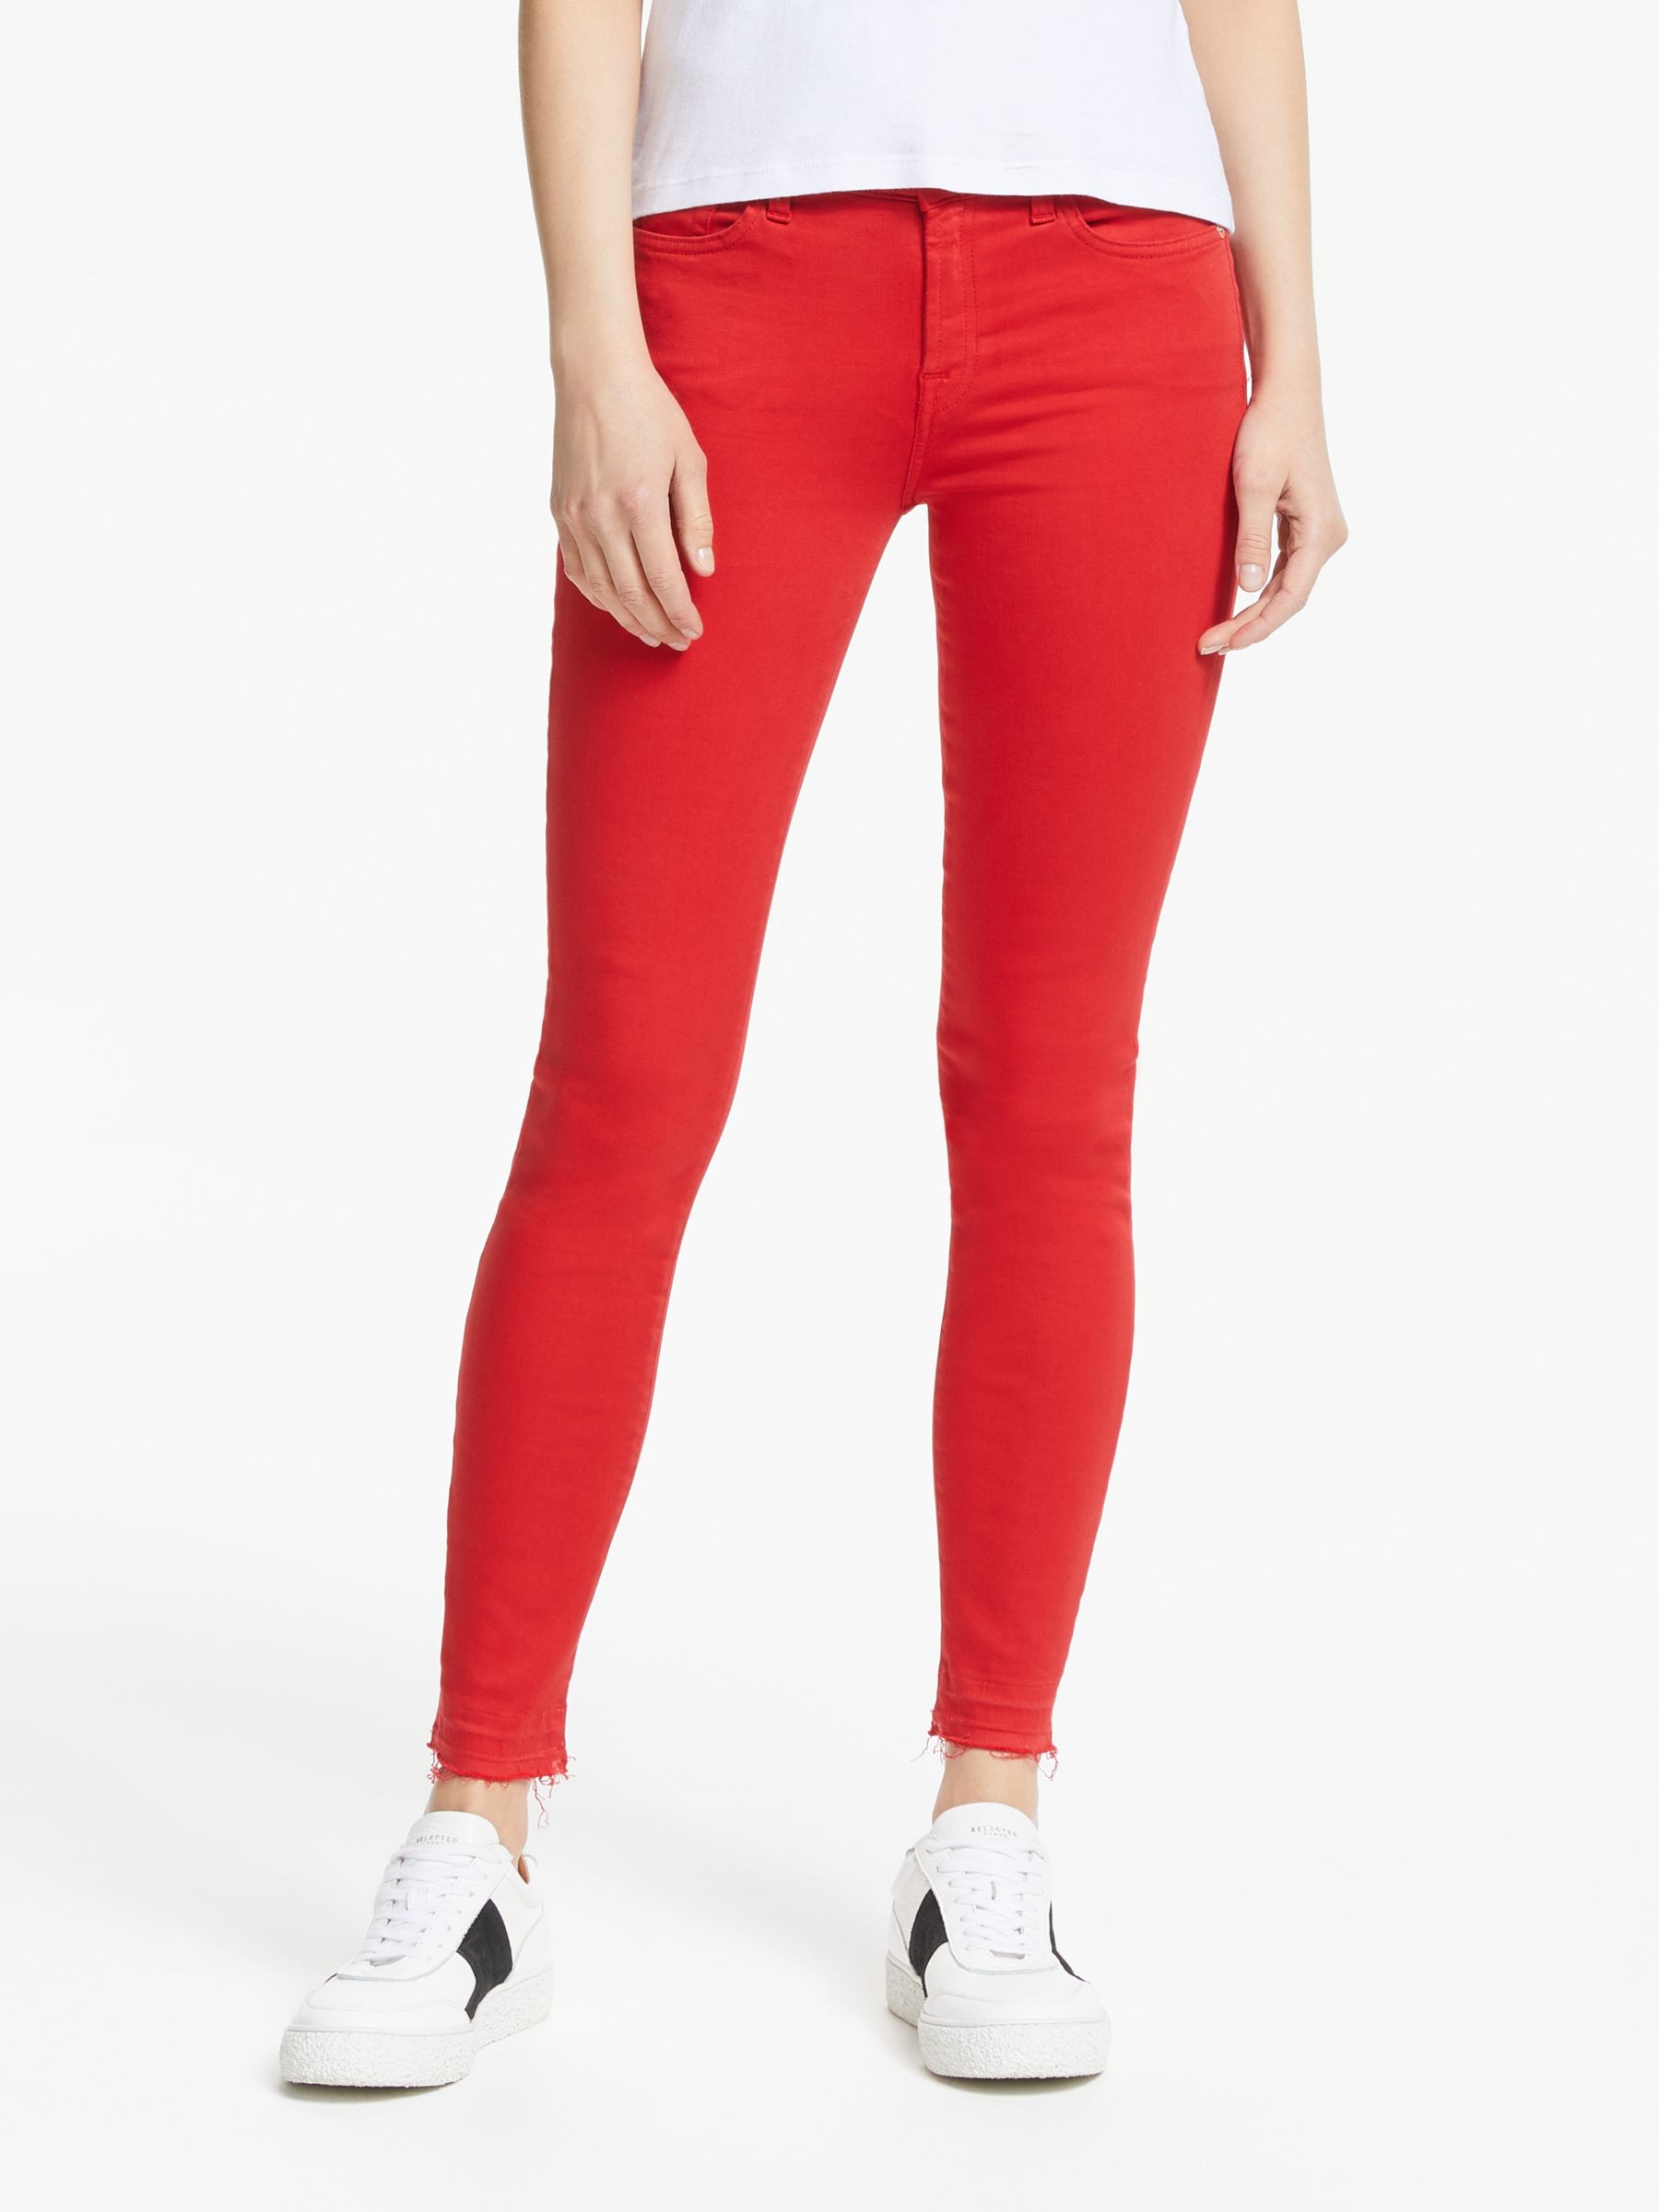 red ankle grazer jeans